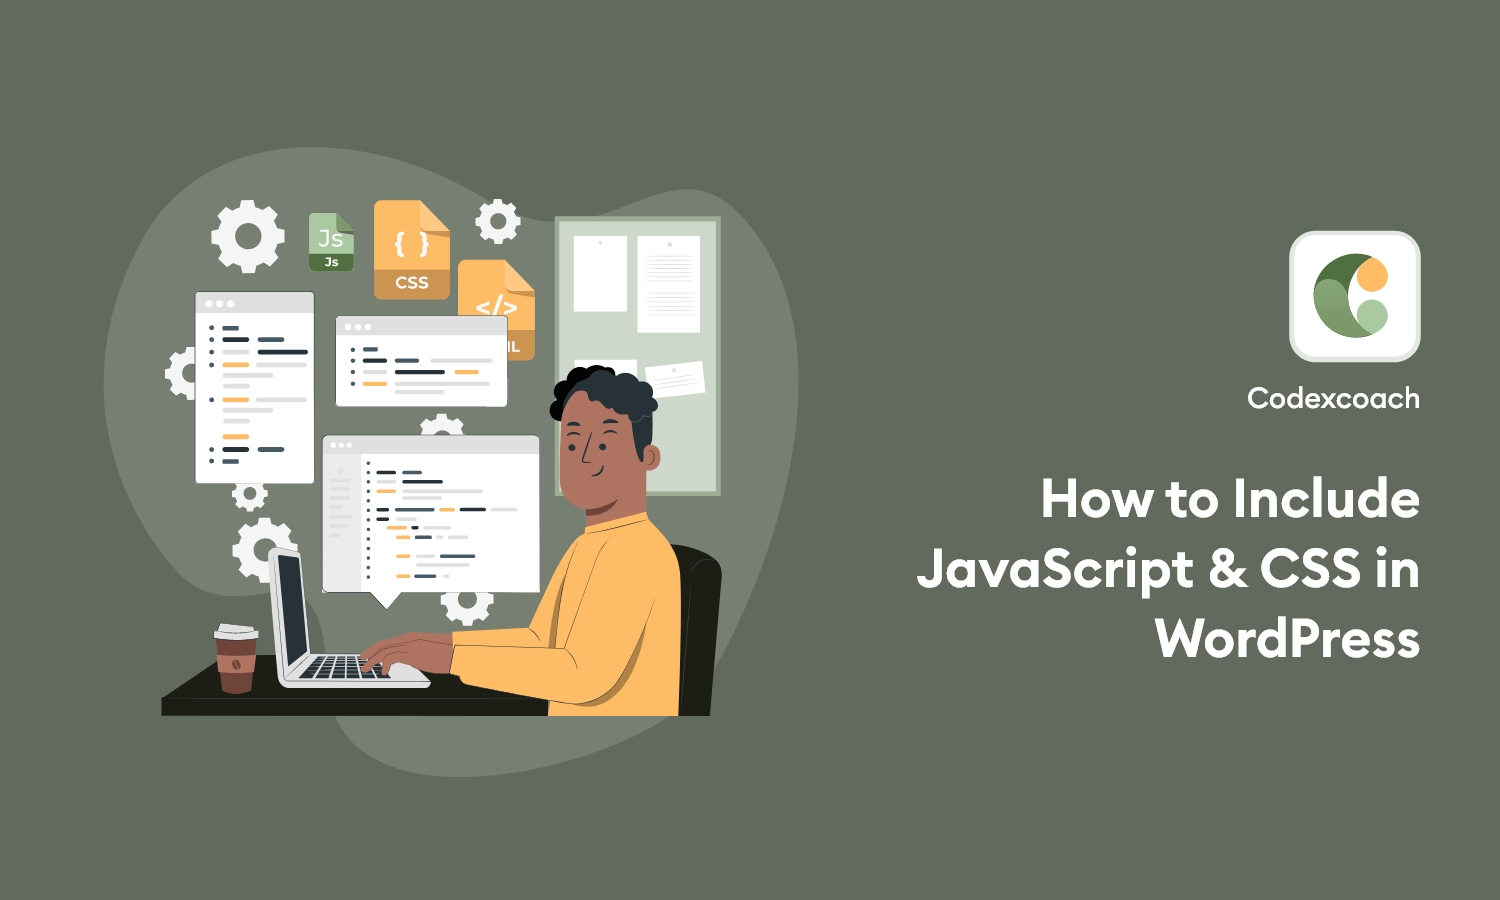 How to Include JavaScript & CSS in WordPress